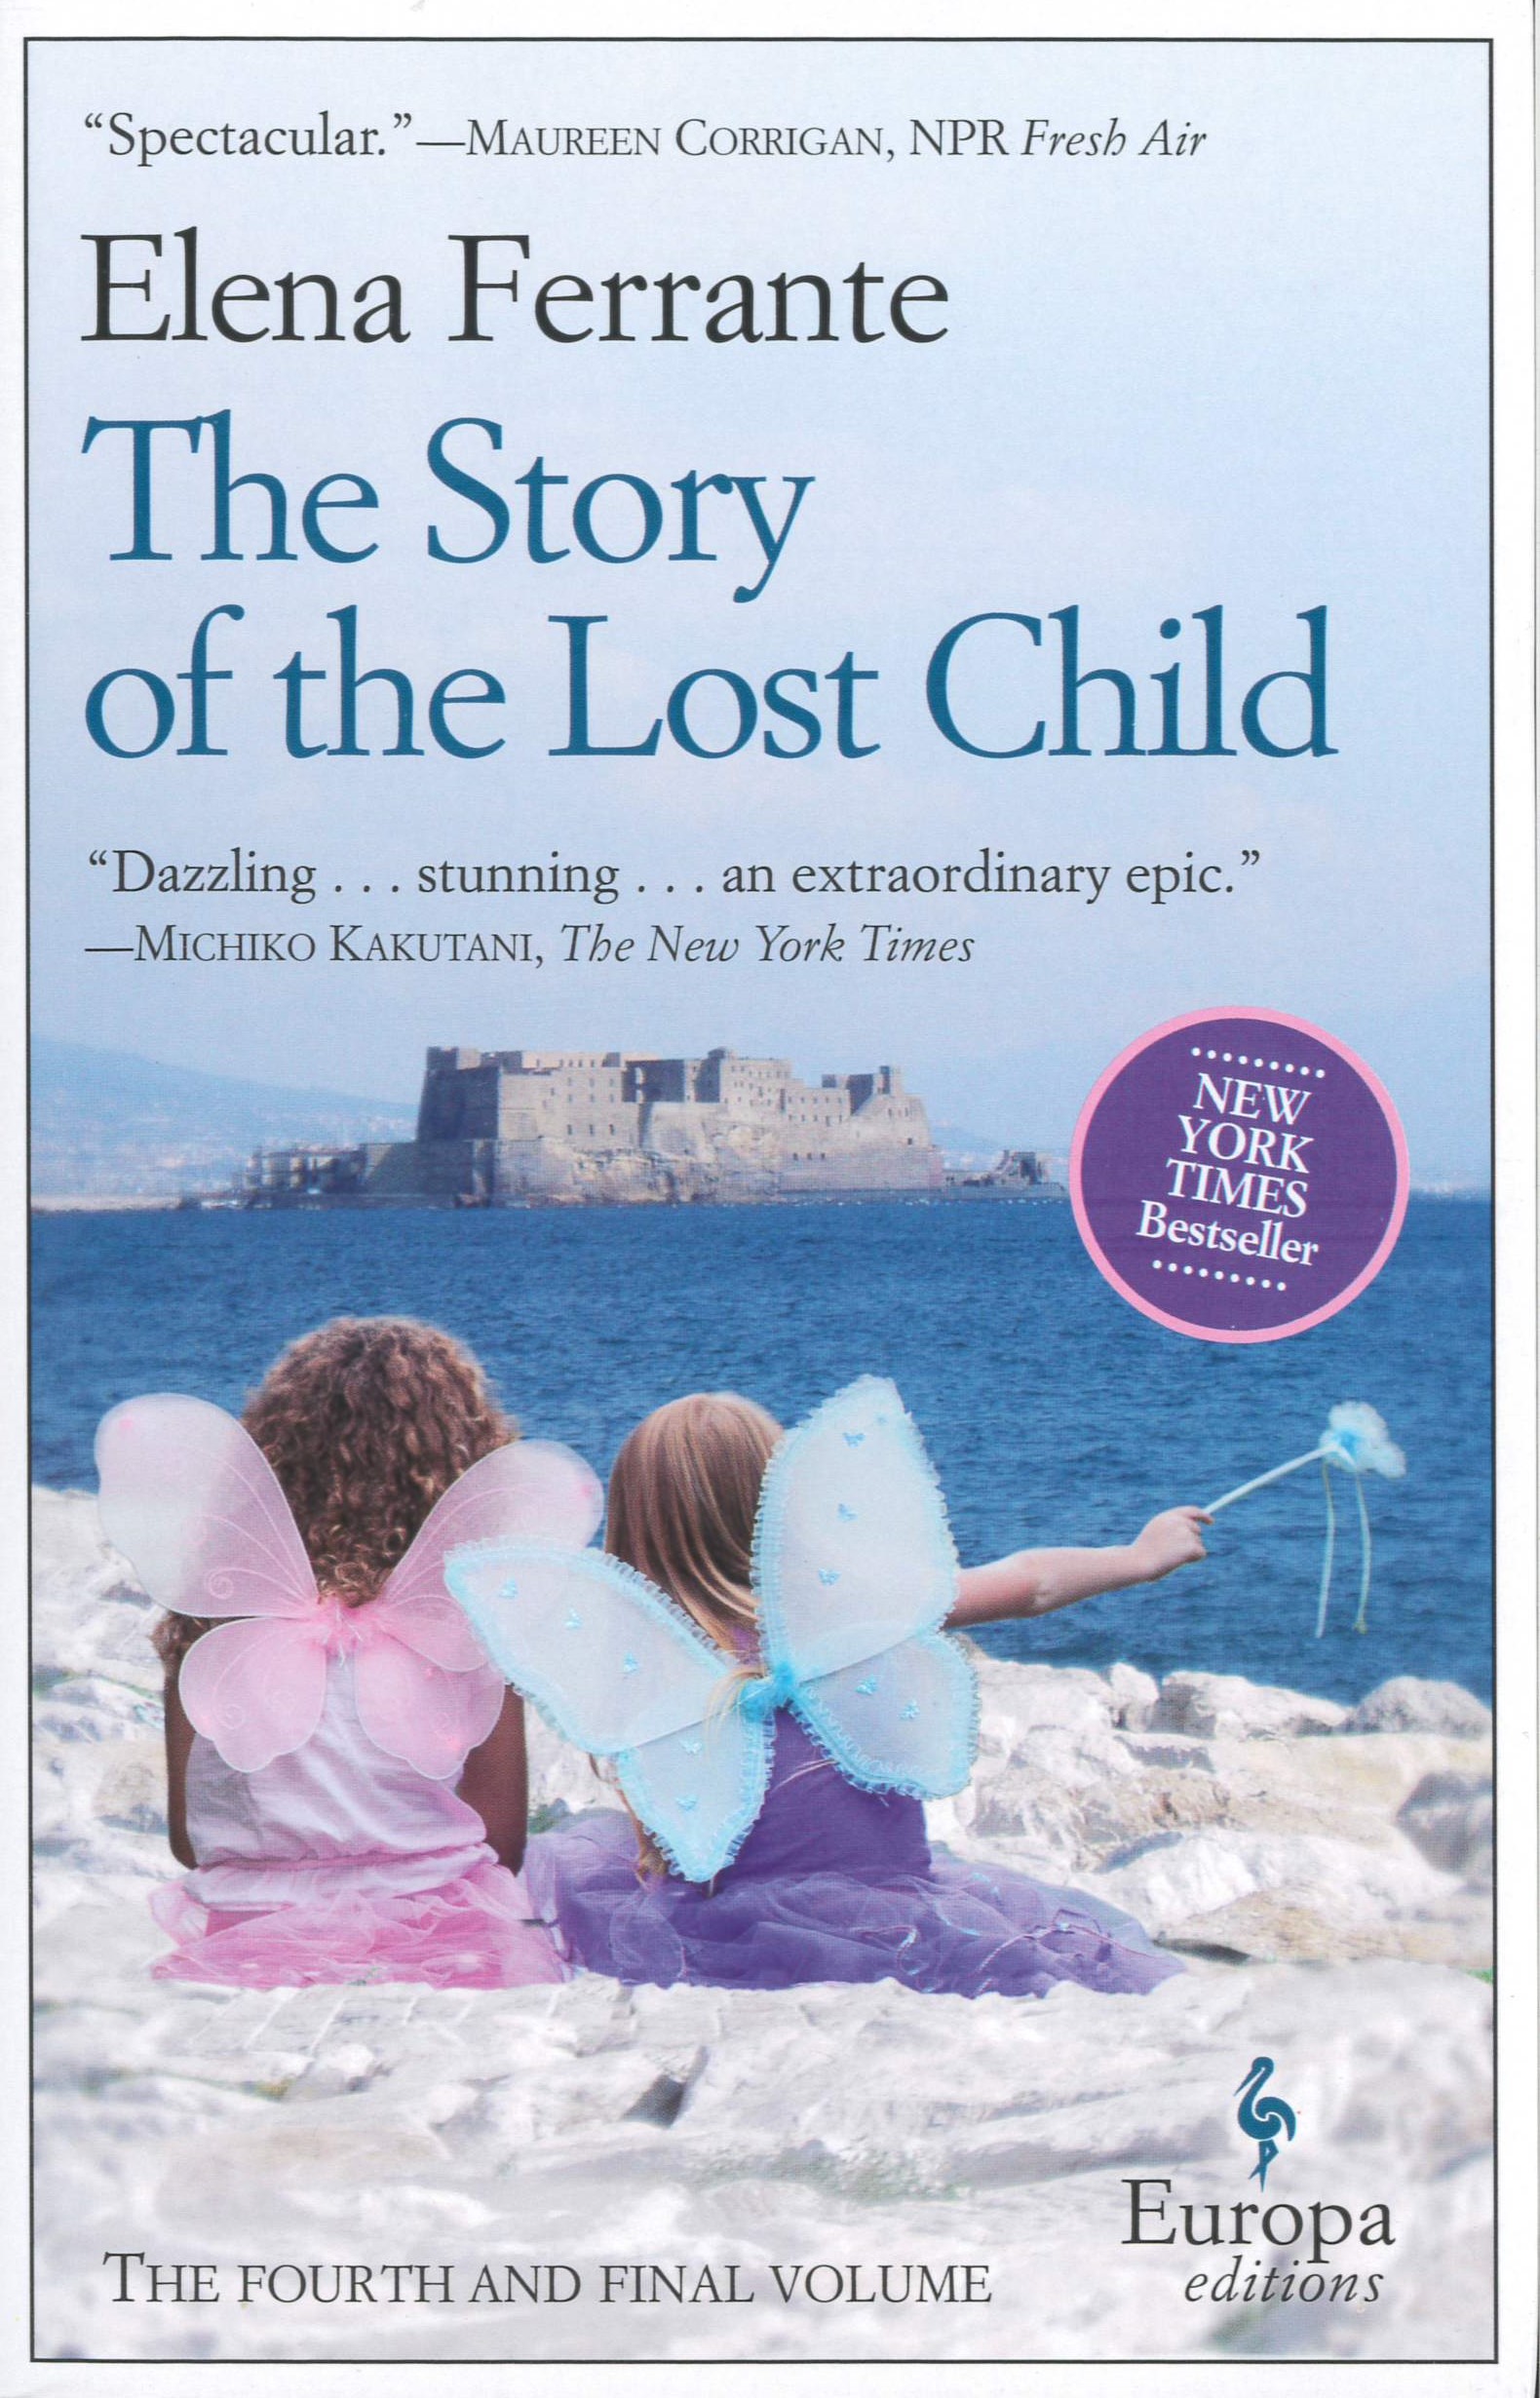 The story of the lost child : maturity, old age /